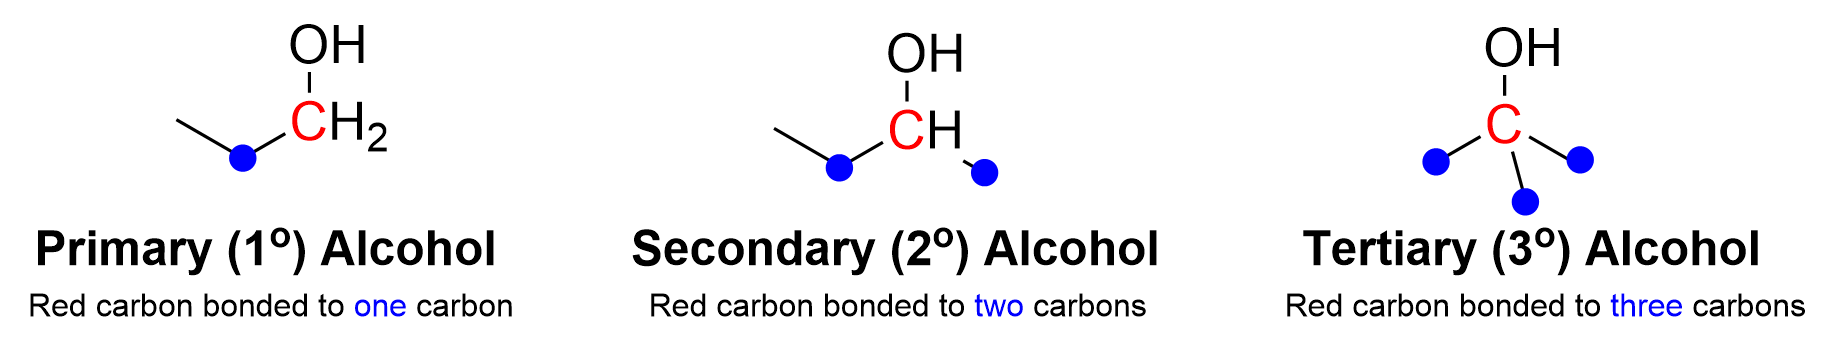 A primary alcohol is when the carbon directly bonded to the alcohol is bonded to one other carbon. Secondary alcohol is when the carbon directly bonded to the alcohol is bonded to 2 other carbons. Tertiary alcohol is when the carbon directly bonded to the alcohol is bonded to 3 other carbons.